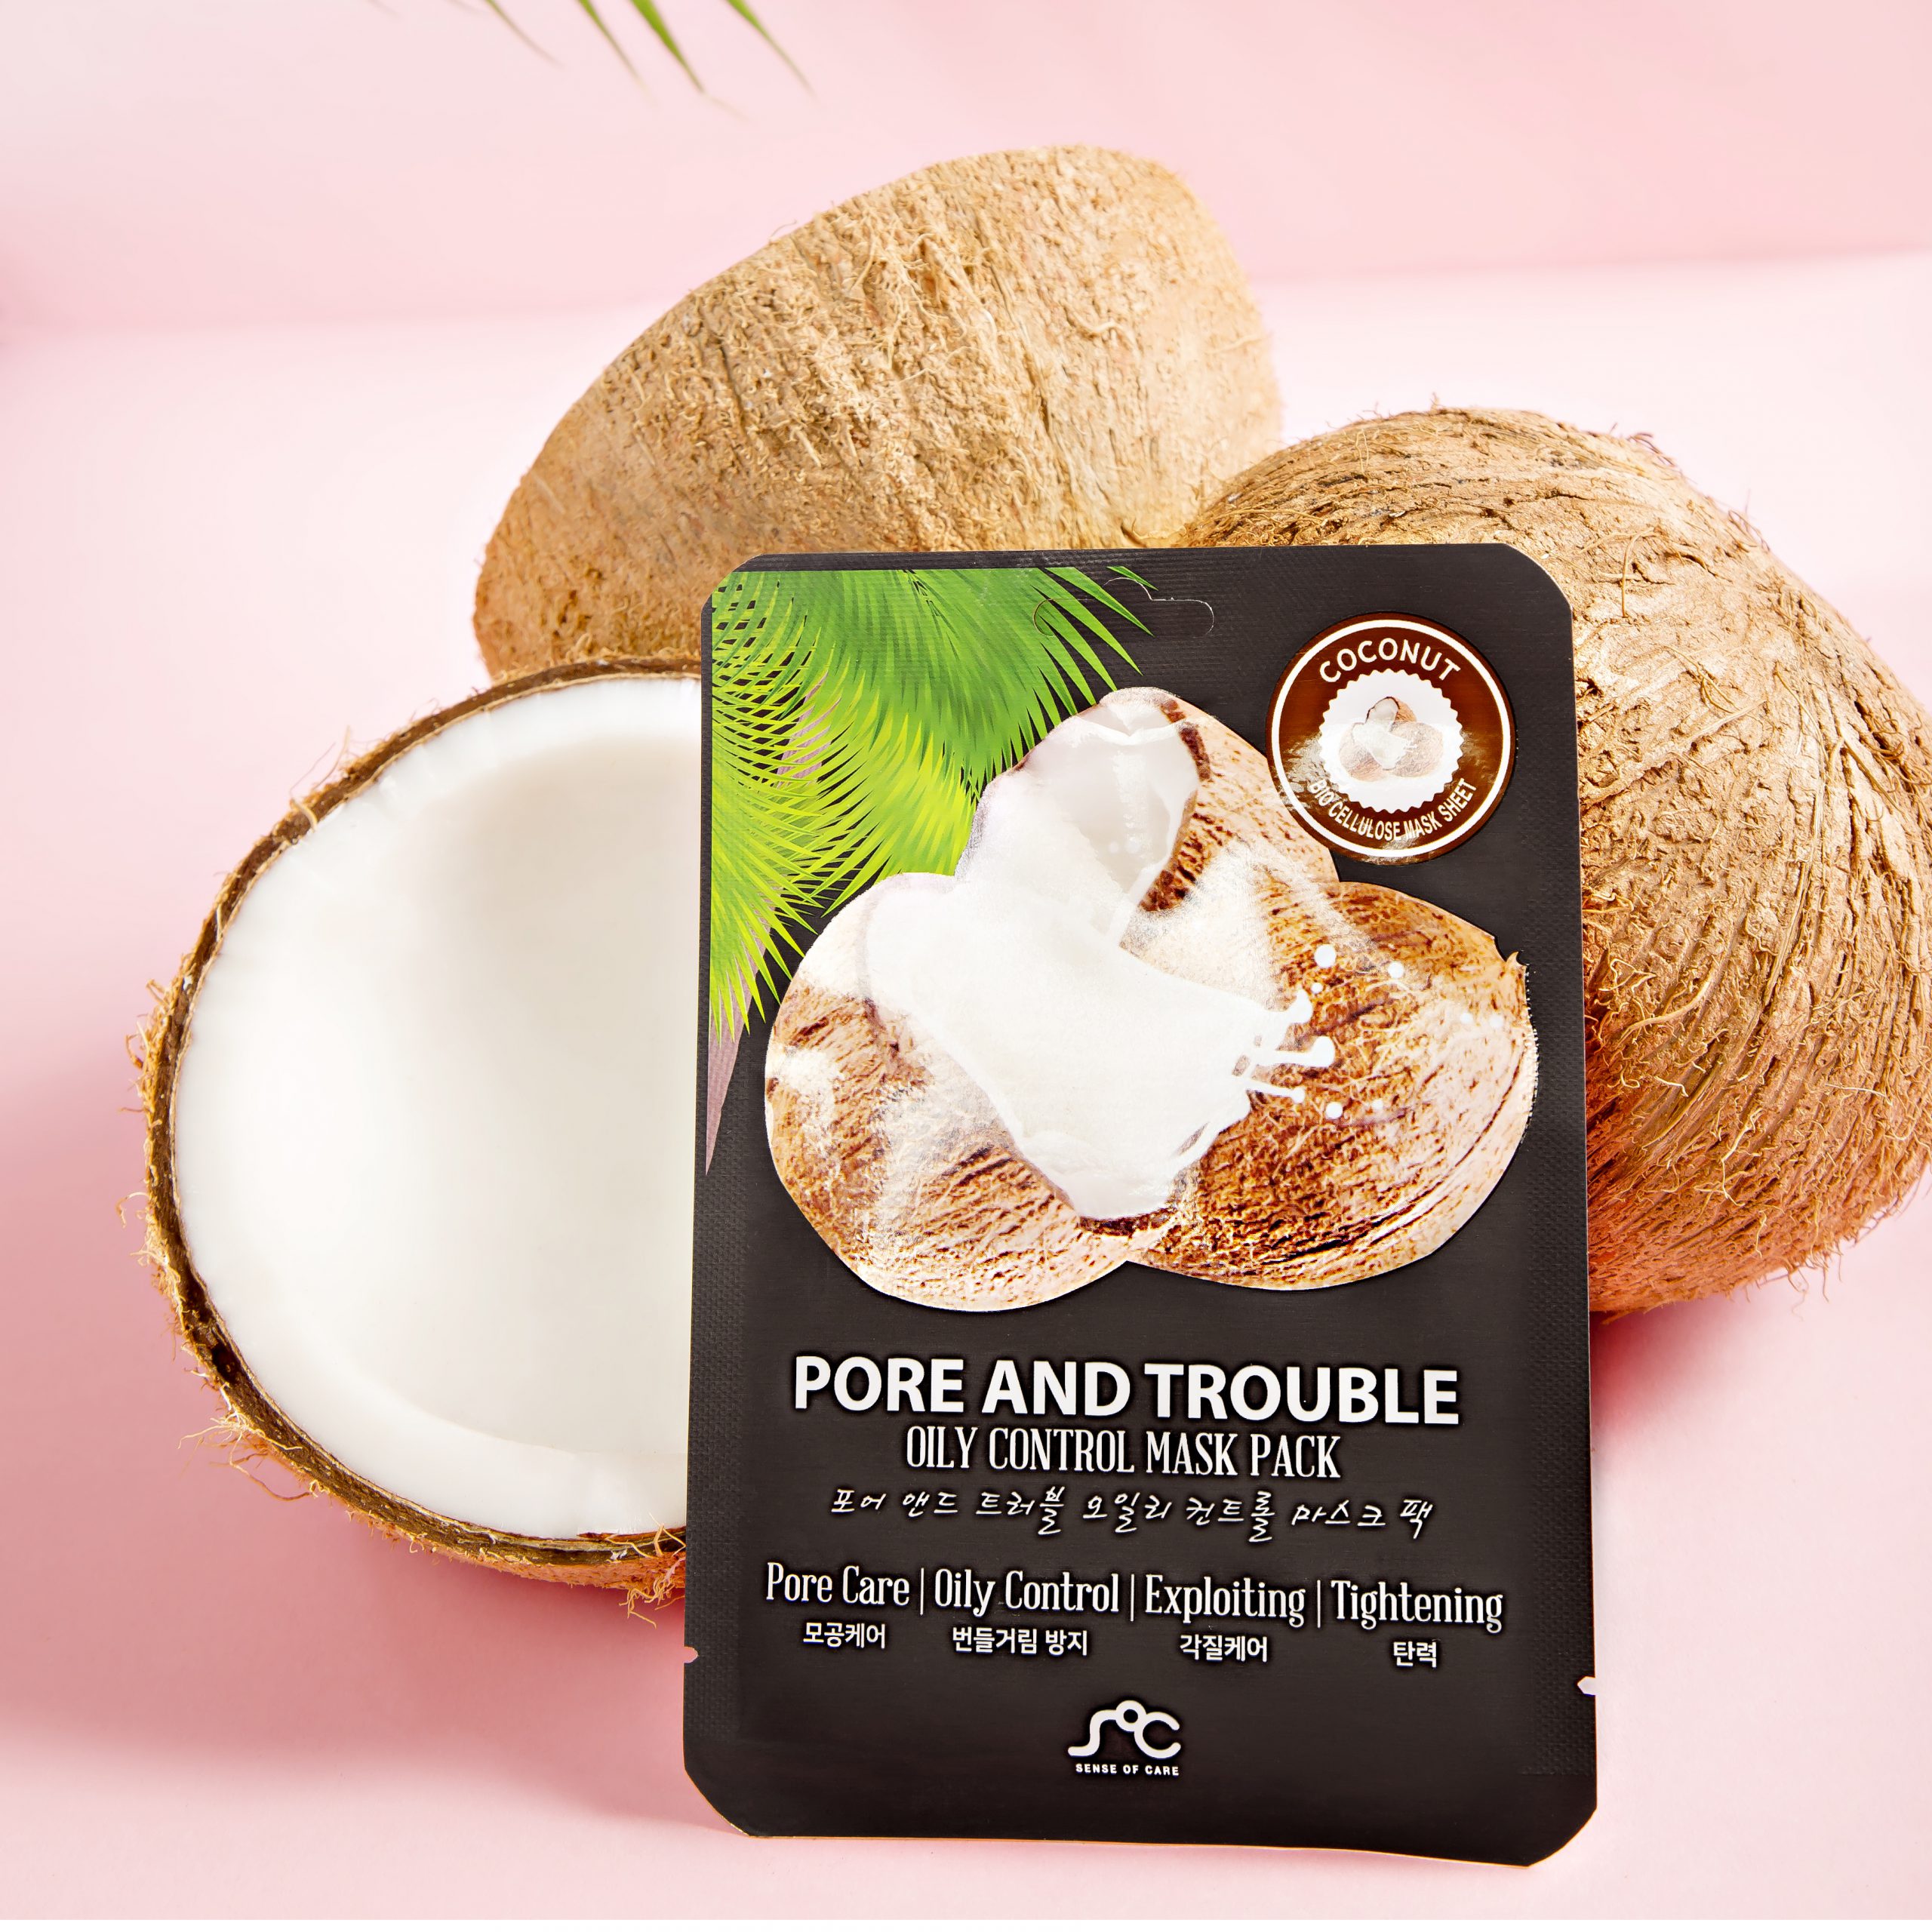 Thiết kế của mặt nạ PORE AND TROUBLE MASK